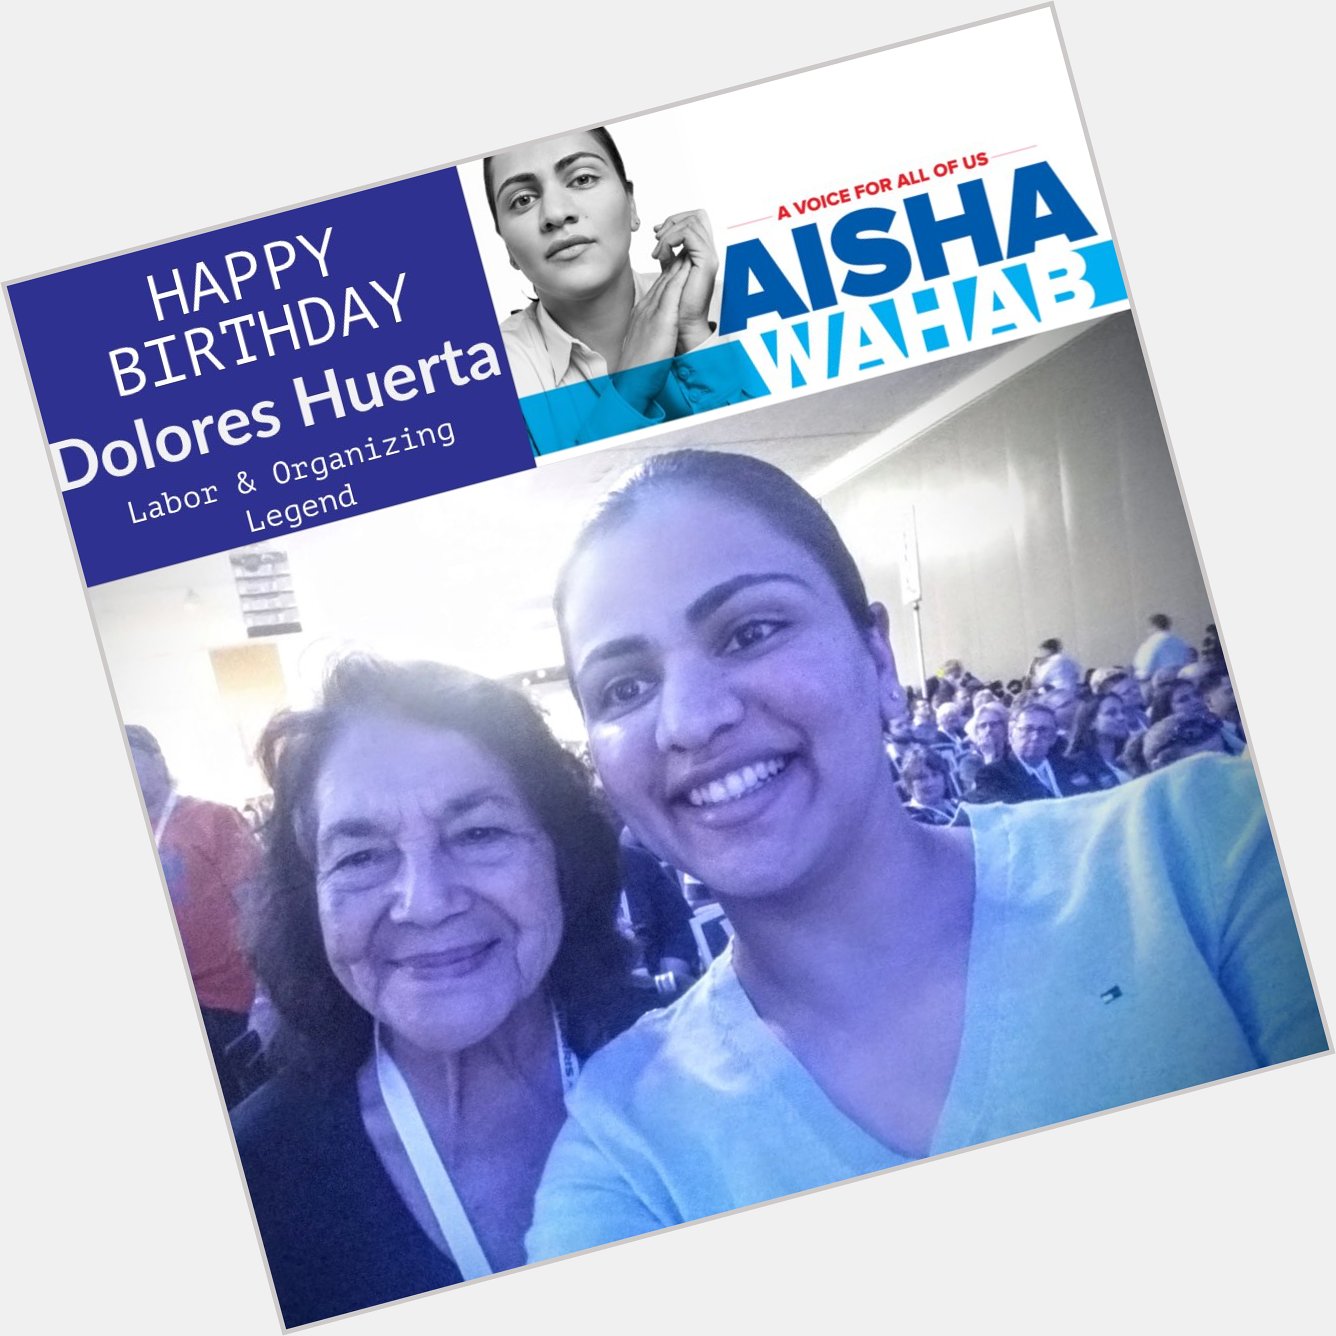 Happy Birthday to Dolores Huerta!
Honored to have been endorsed by you. 